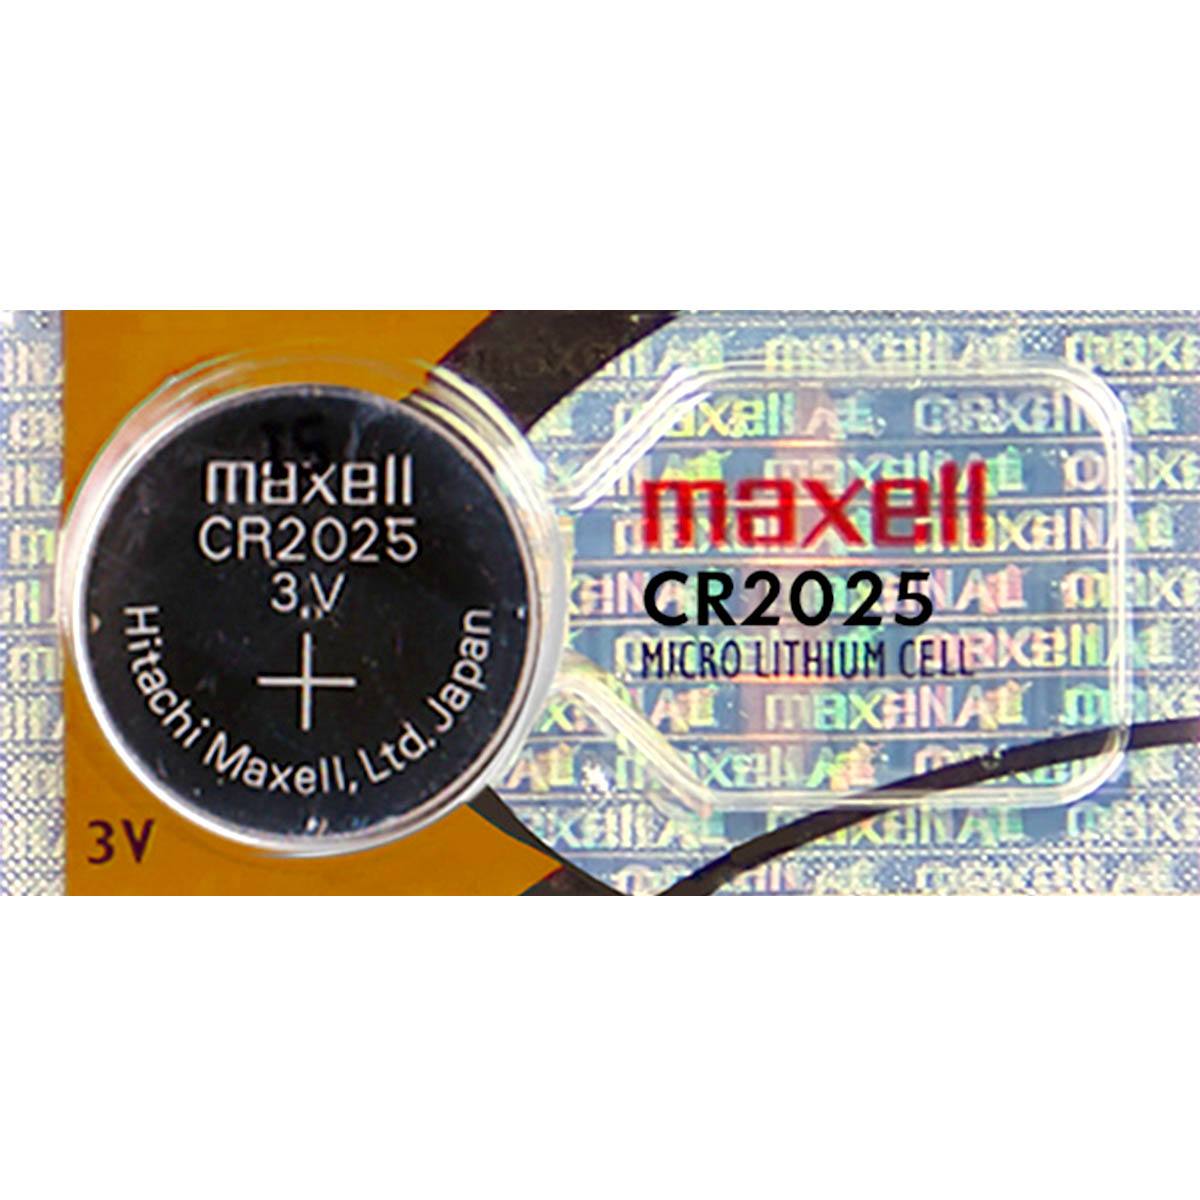 MaxPowerCell CR2025 3V, 160mAh Lithium Button Cell Battery